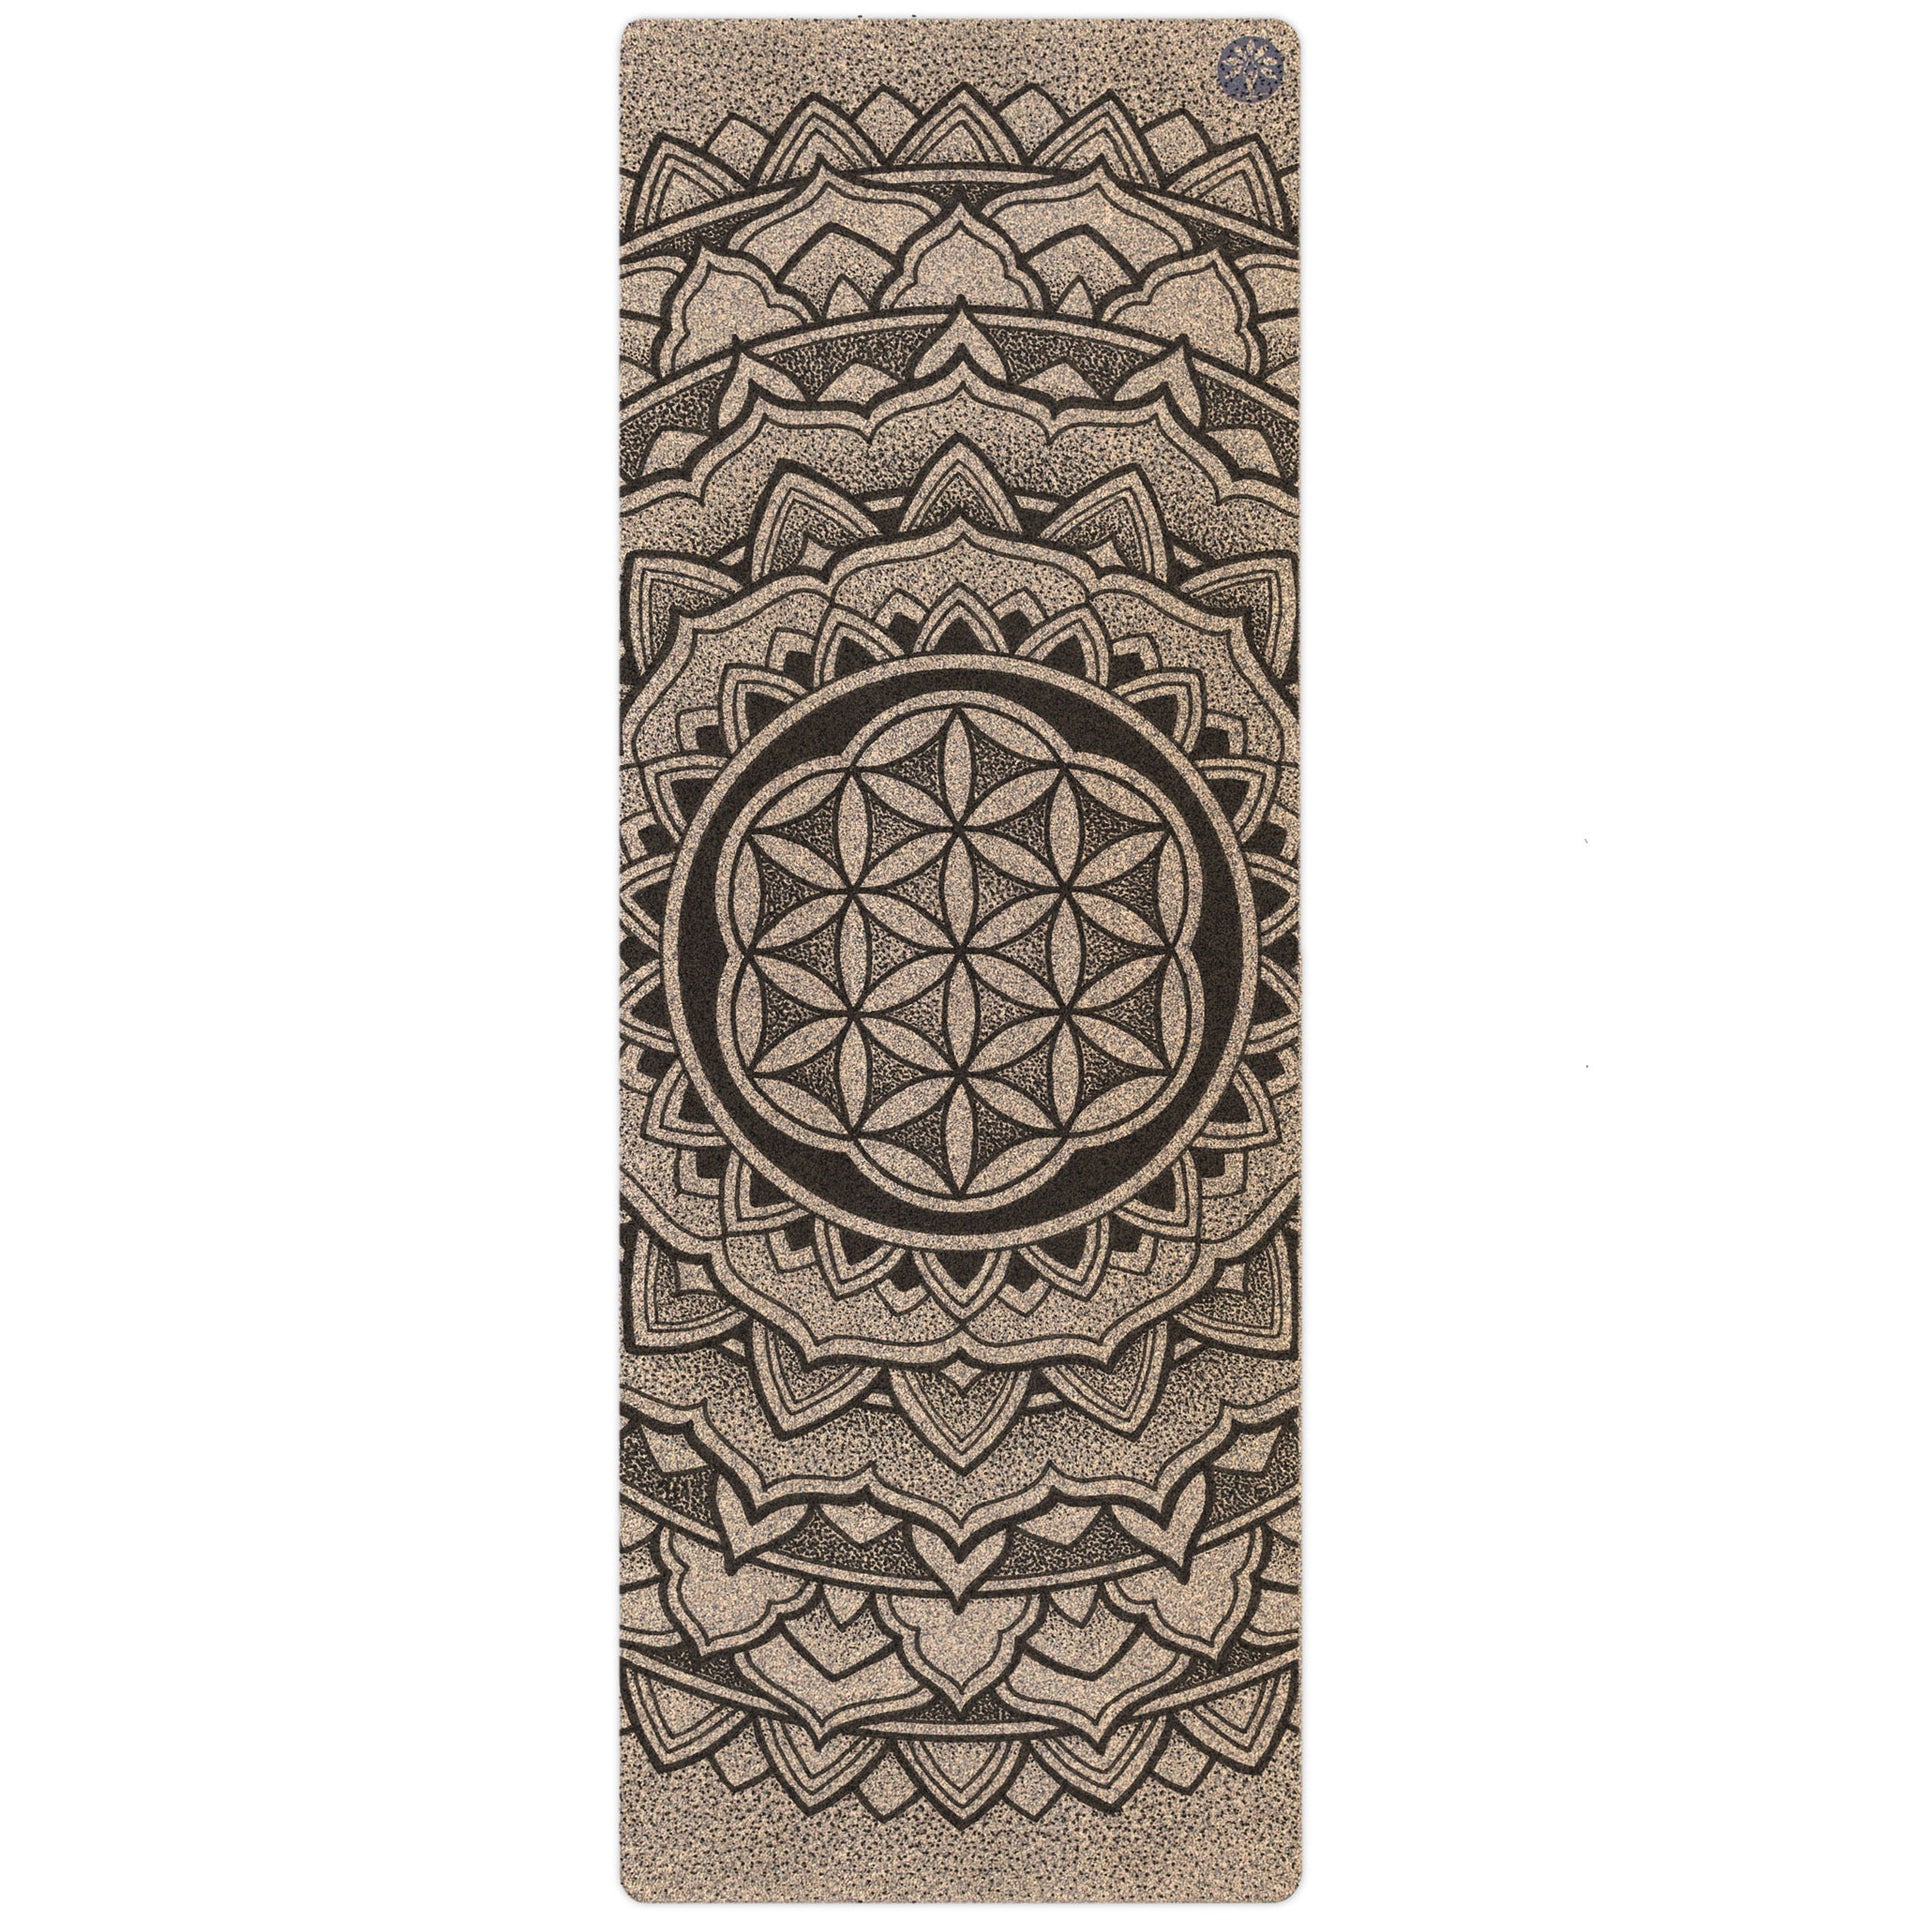 YOGA DESIGN LAB The Travel Yoga MAT 2-in-1 Mat With Carry Strap! 